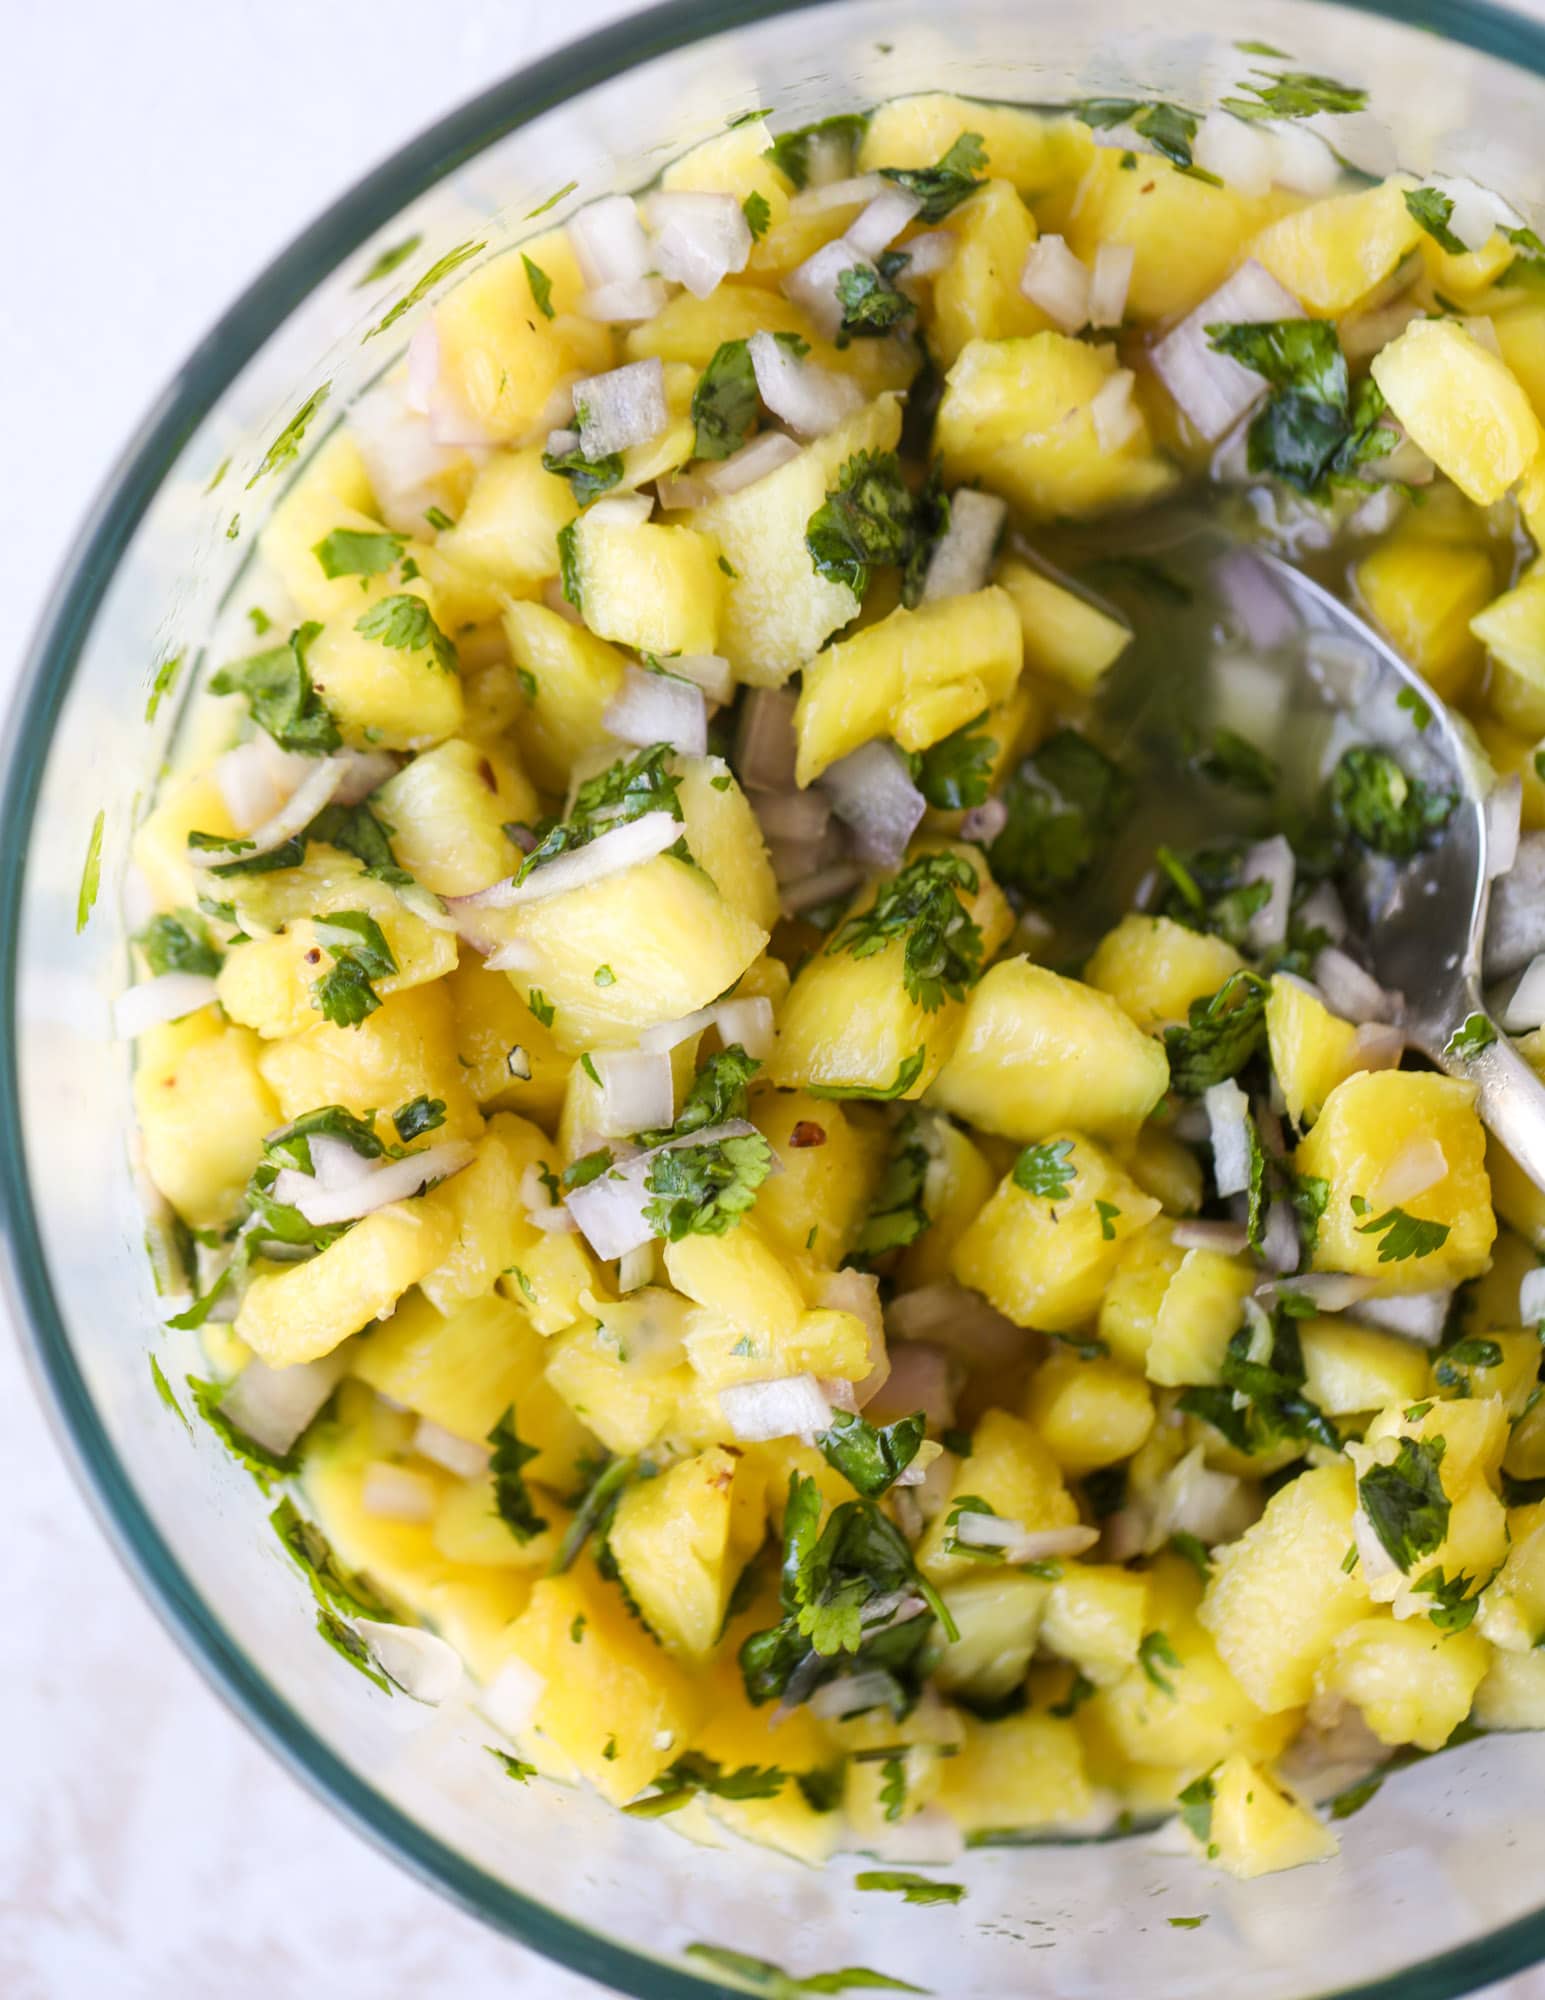 Pineapple salsa for roasted chicken! I howsweeteats.com #sticky #chicken